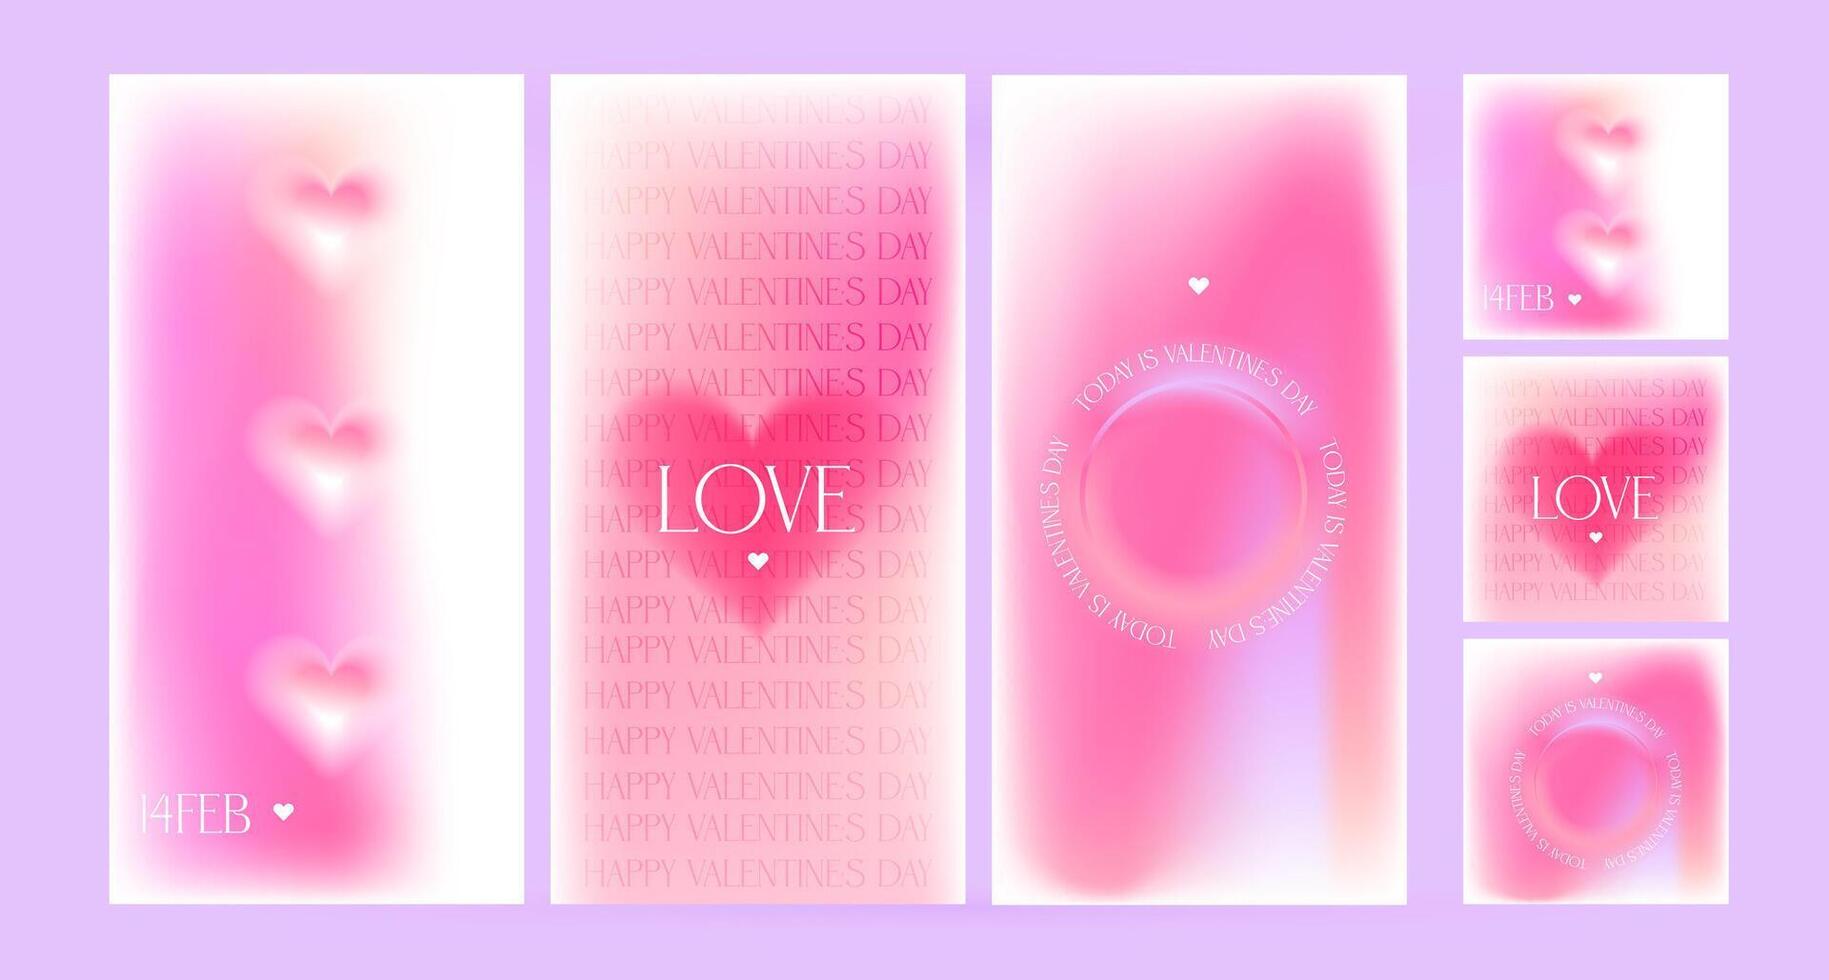 Stories blurry gradient templates set with geometric shapes, heart, blurred sparkles, copy space for text in 00s style. Smm banners in y2k aesthetic. Vector Designs for social media marketing